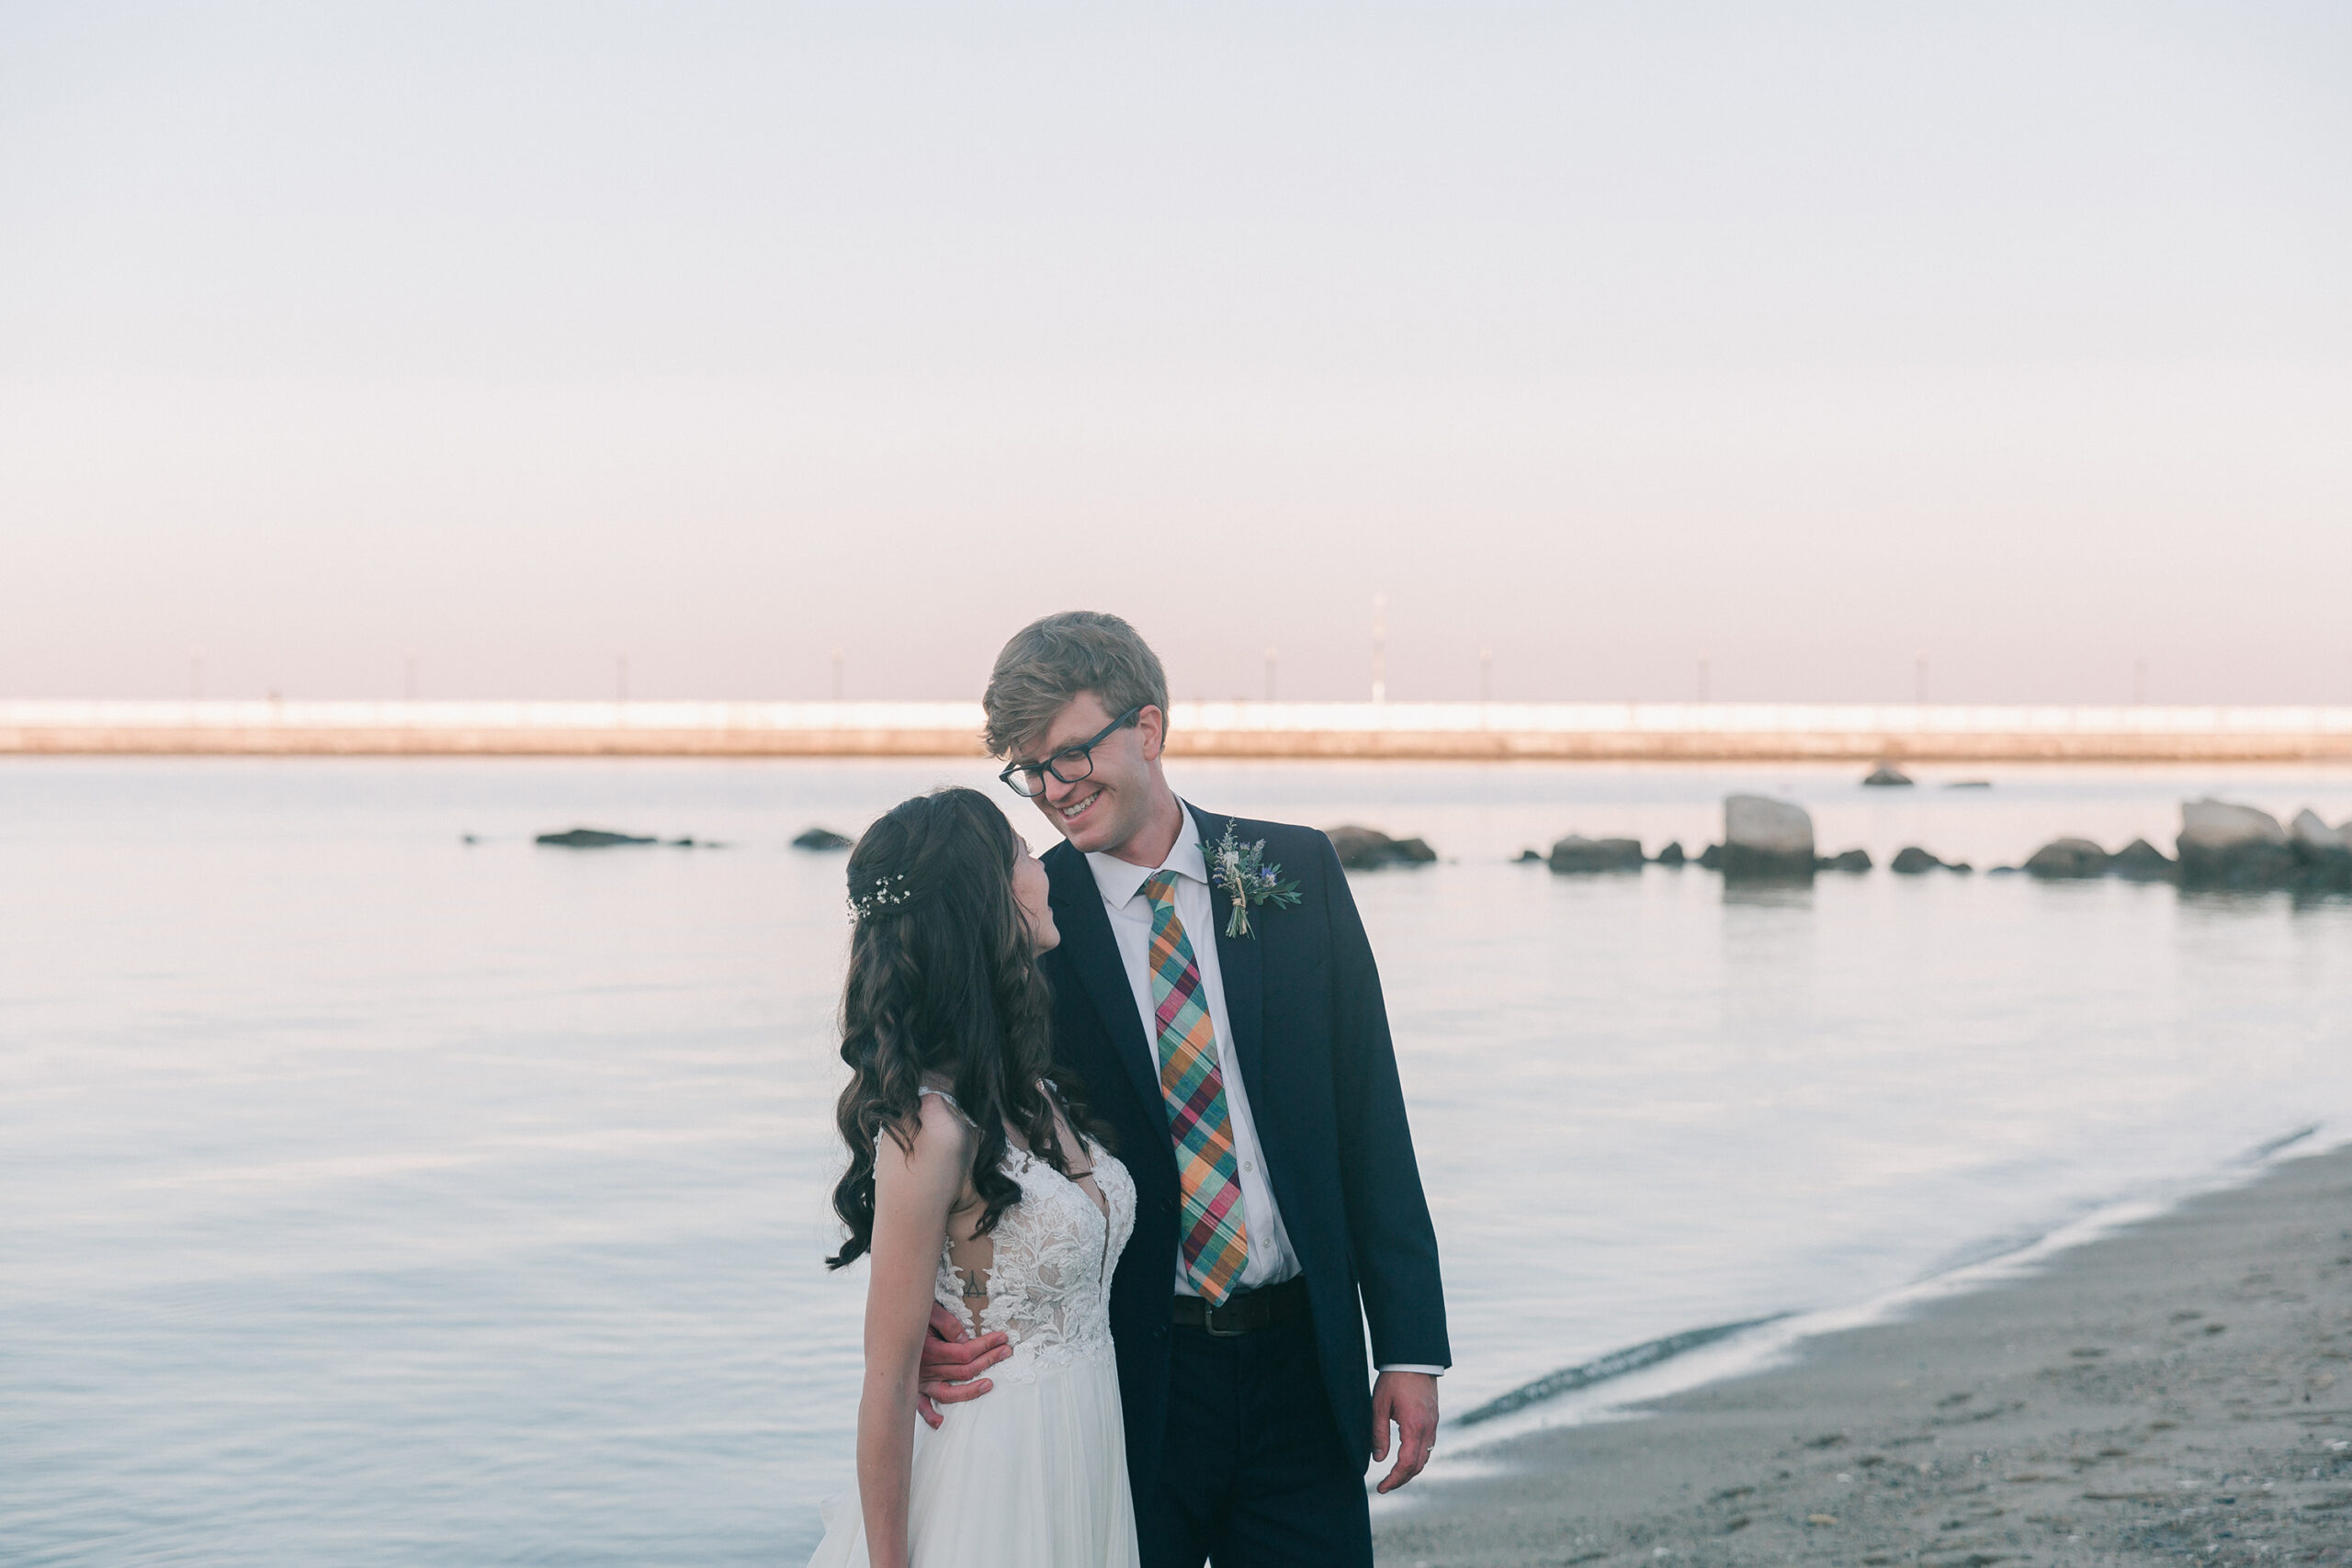 newlywed couple posing for sunset photos on the beach after their wedding, planned by Cose Bella Events, a Rhode Island wedding planner 